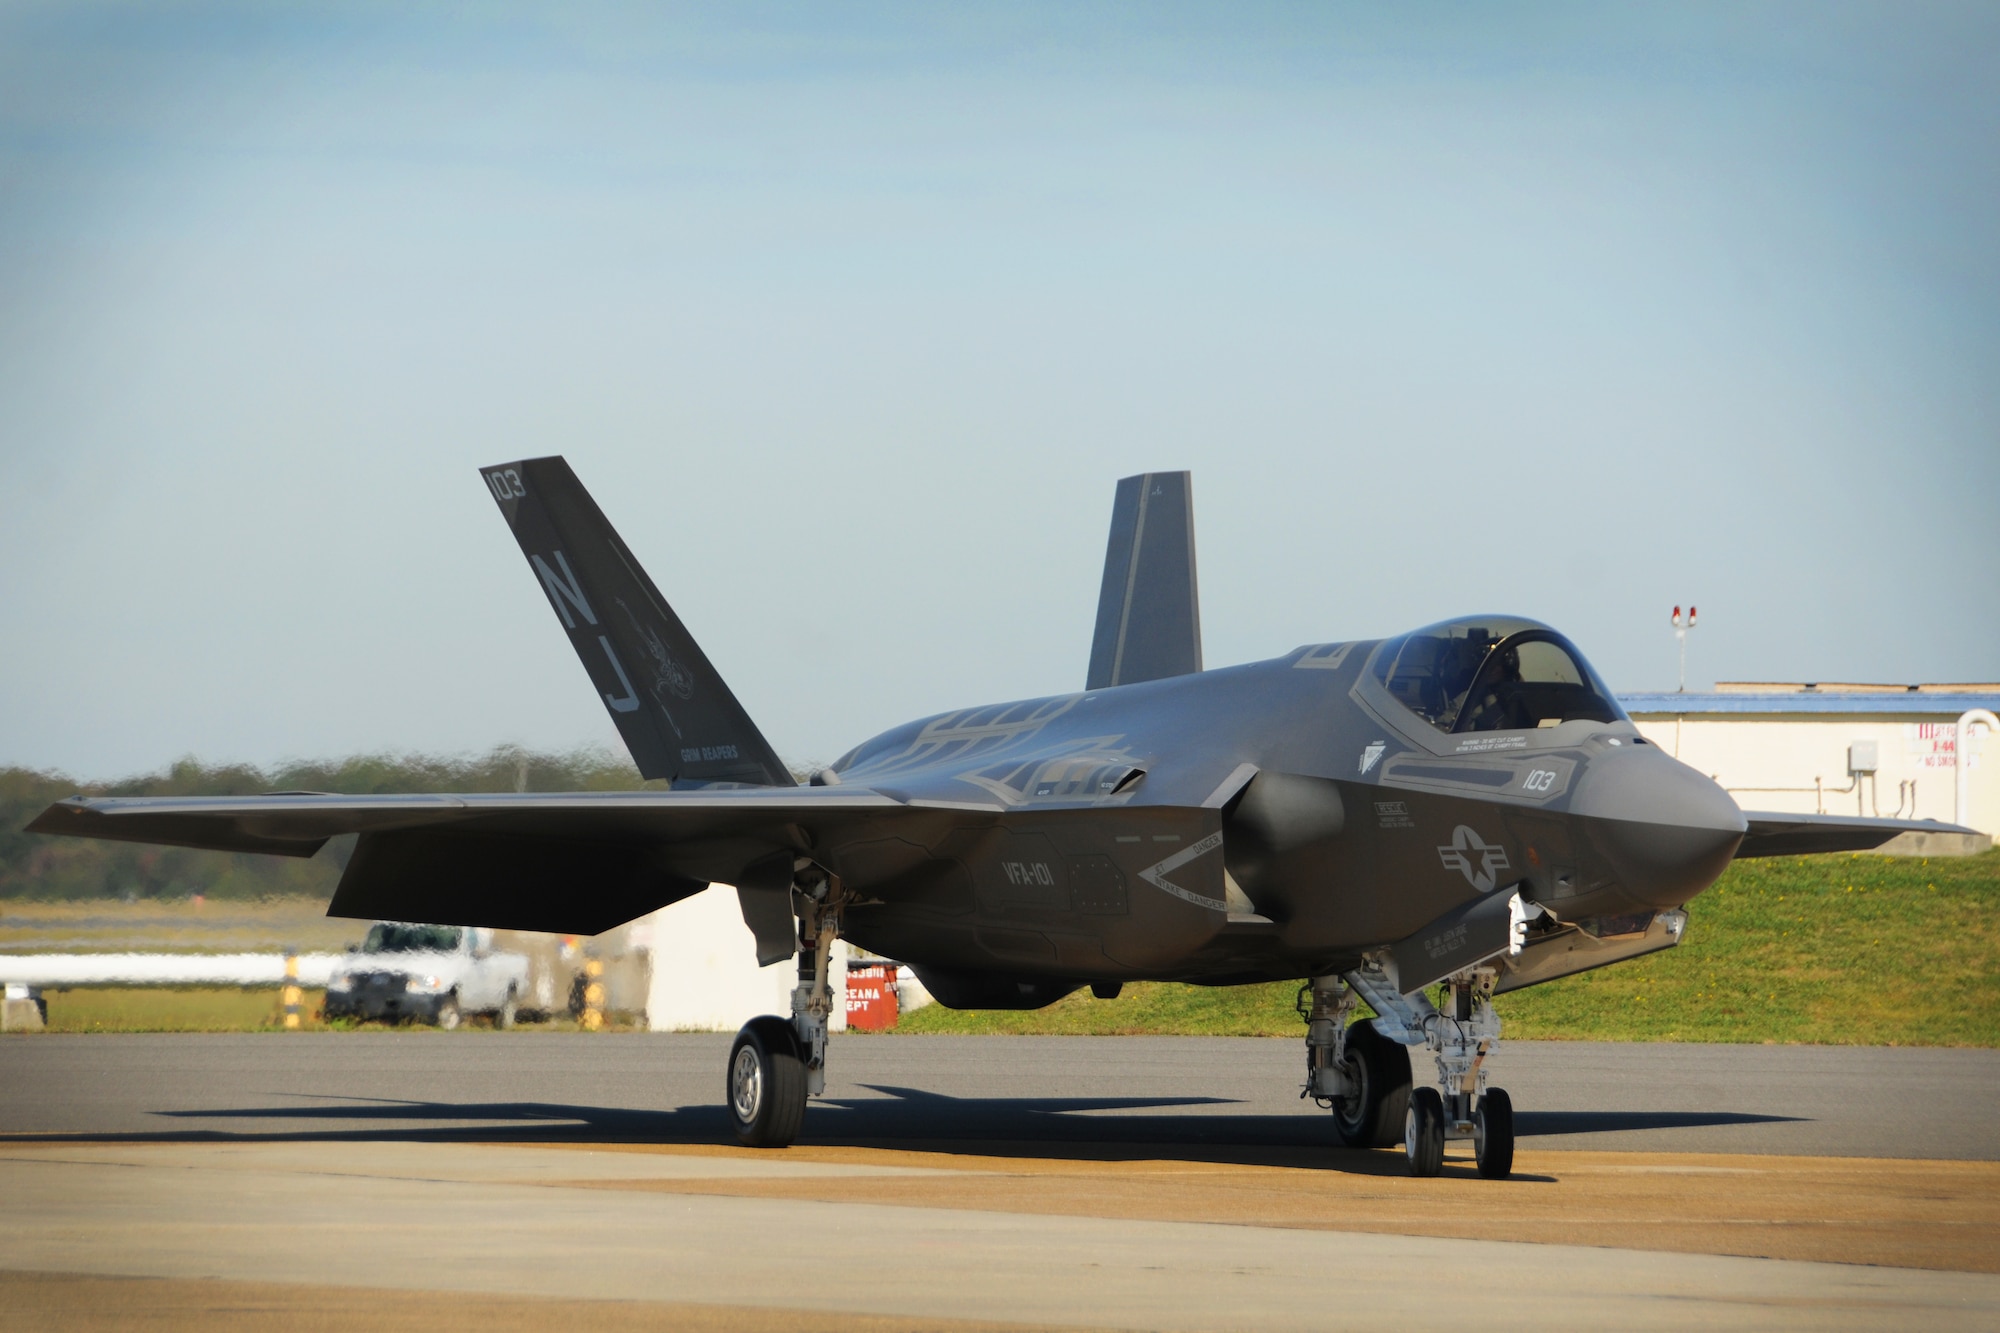 An F-35C Lightning II, assigned to the "Grim Reapers" of Strike Fighter Squadron (VFA) 101, completes its first landing at Oceana, providing Sailors a chance to learn more about the platform.  The F-35 is a single seat, multi-role fighter aircraft designed to replace the F/A-18 Hornet and AV-8B Harrier. The aircraft was planned with a common design, but consists of three unique service variants capable of performing ground attack, reconnaissance and air defense missions. The F-35C is the carrier variant of the Lockheed Martin built aircraft. (U.S. Navy photo by Mass Communication Specialist 1st Class Ernest R. Scott/Released)